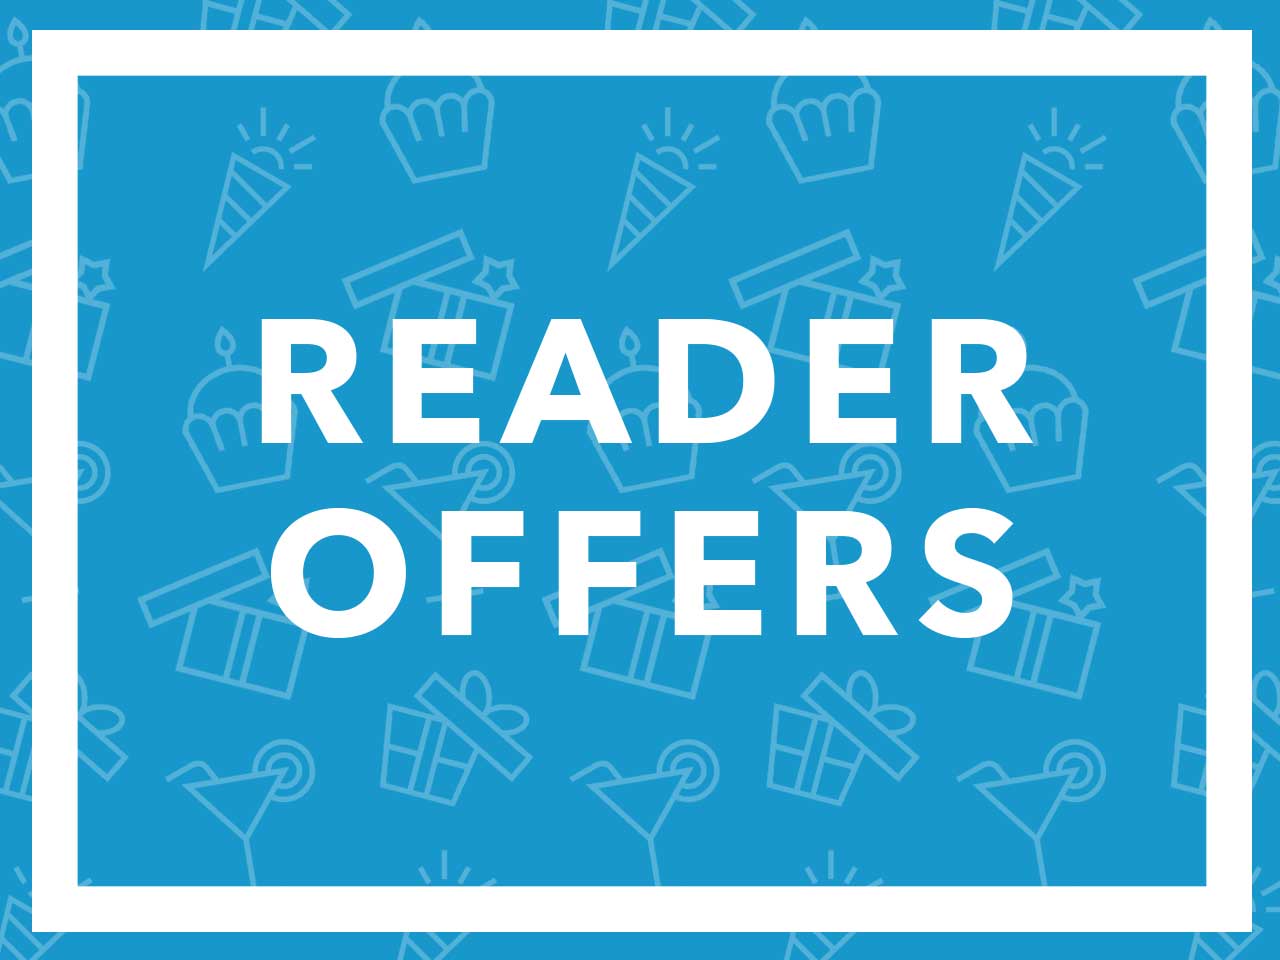 Special Reader Offers from Saga